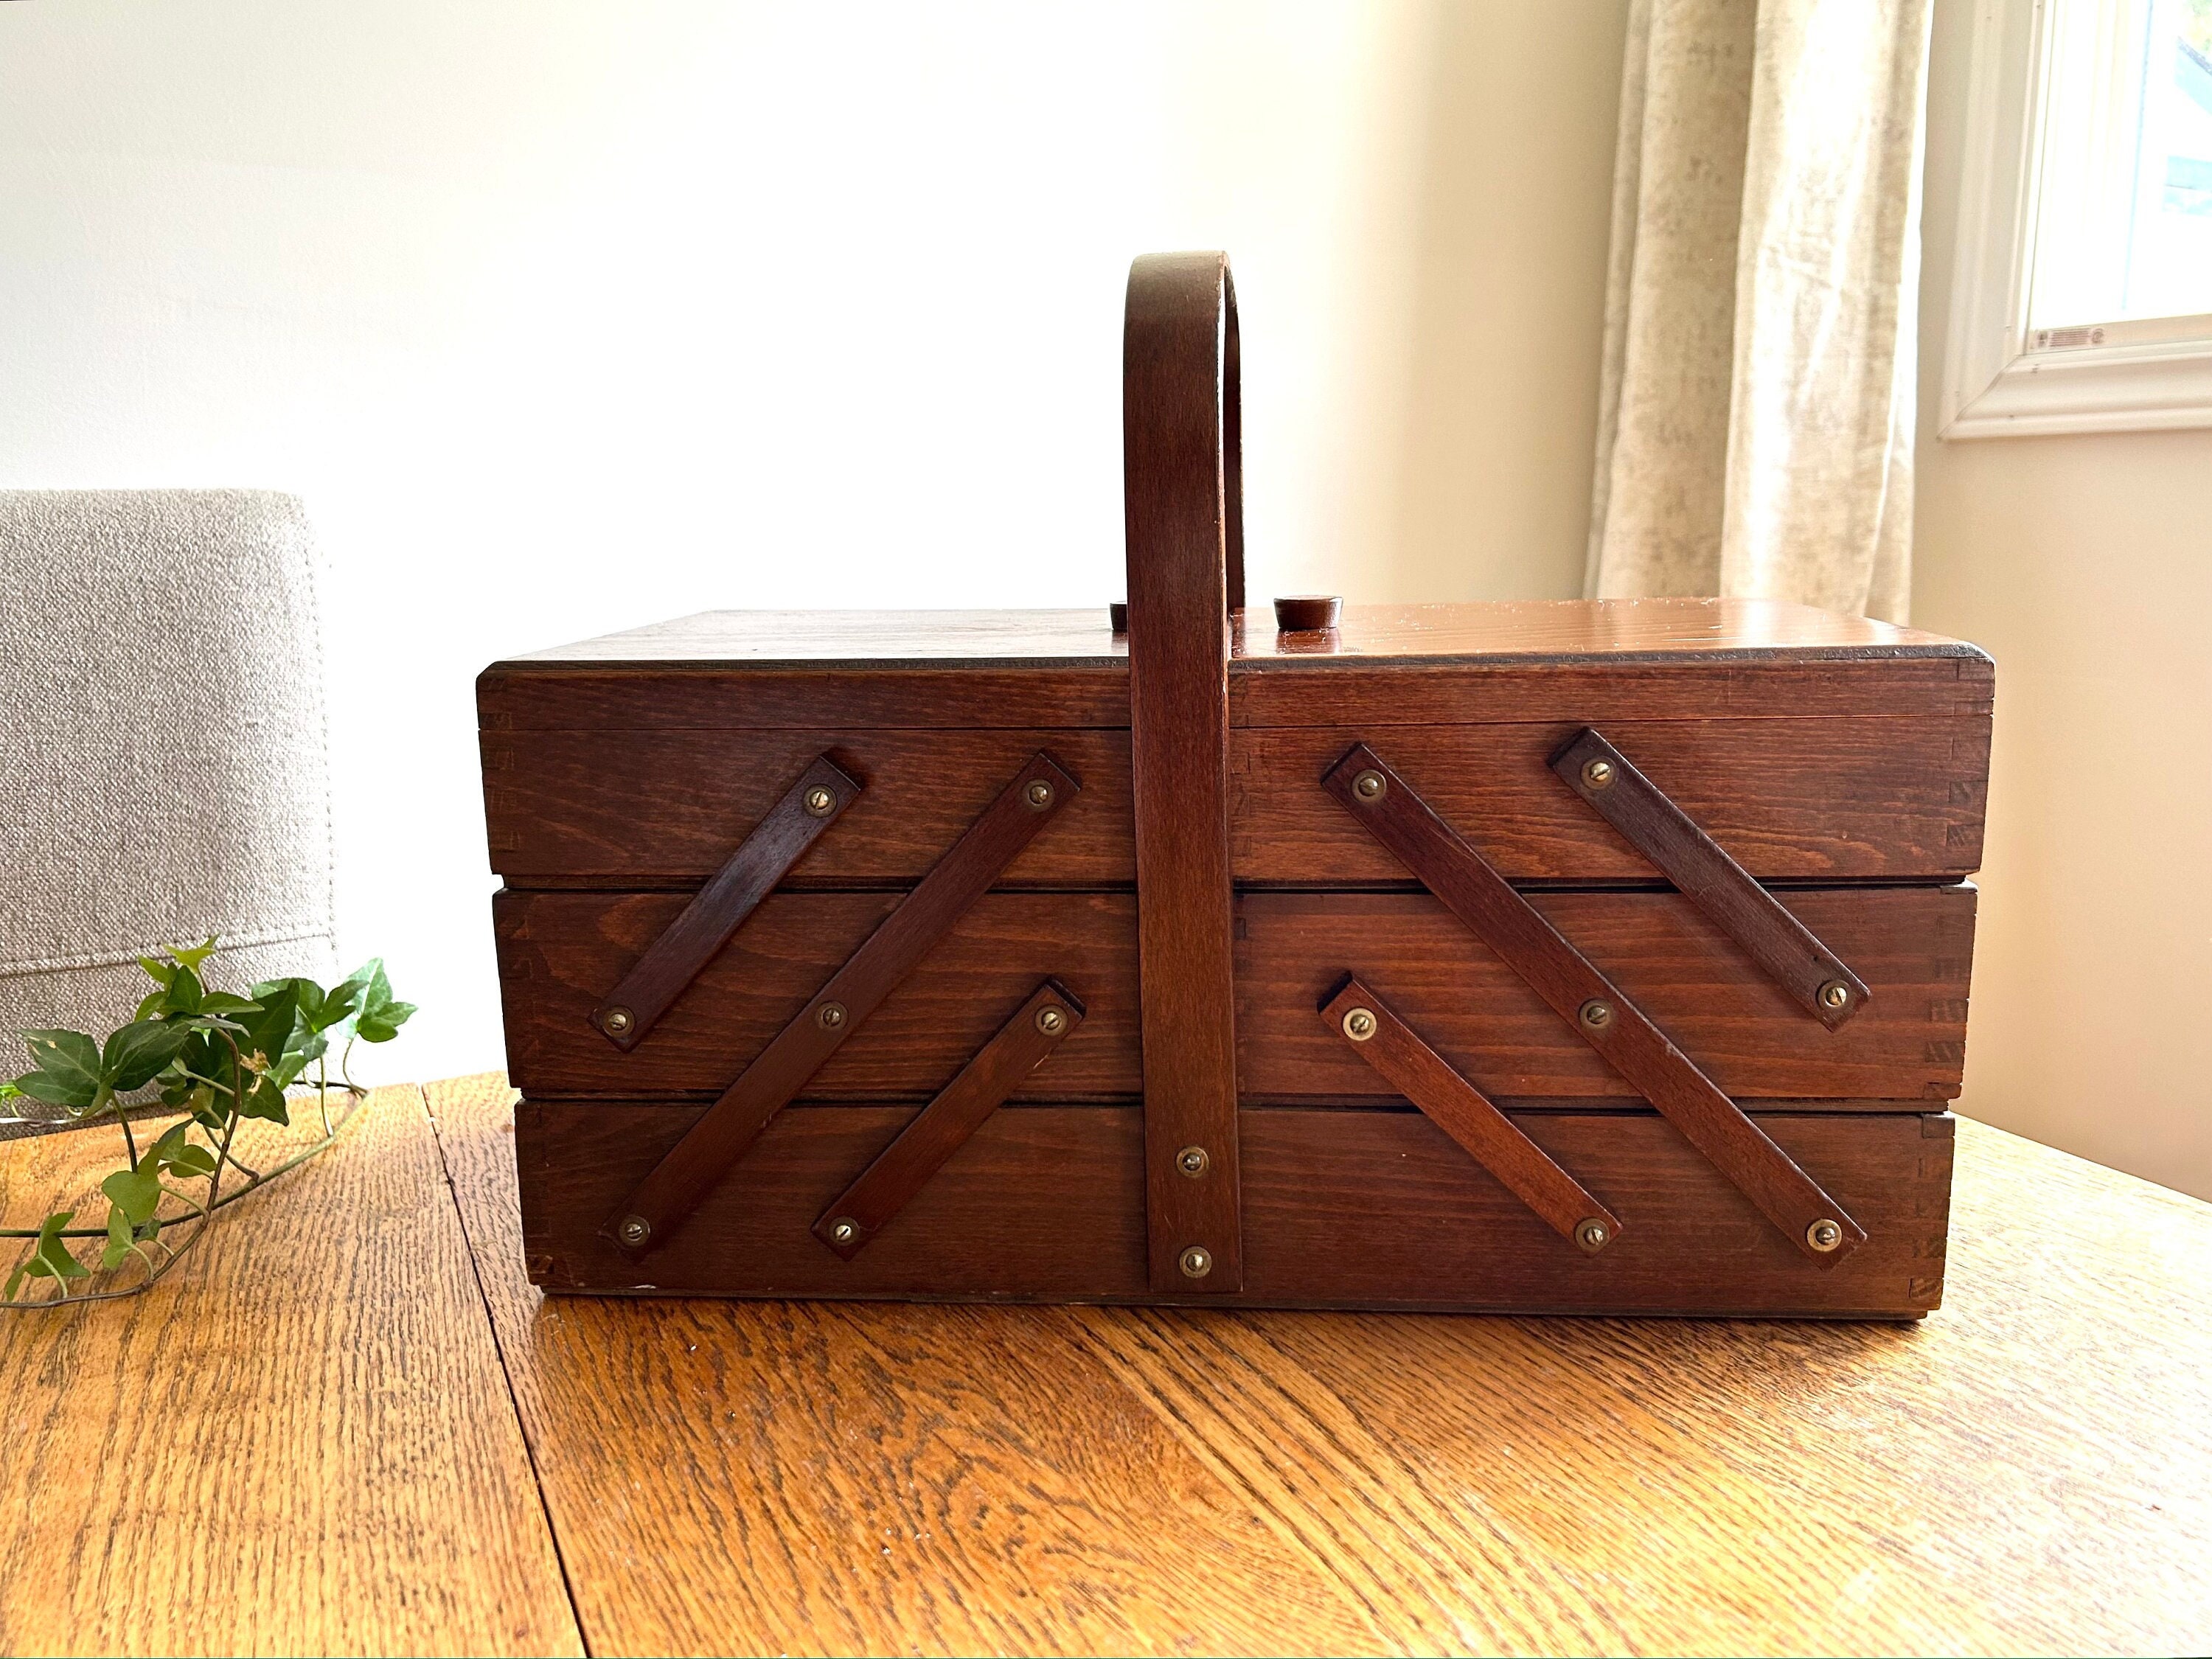 Wooden Sewing Box/sewing Gift/sewing Organizer/sewing 